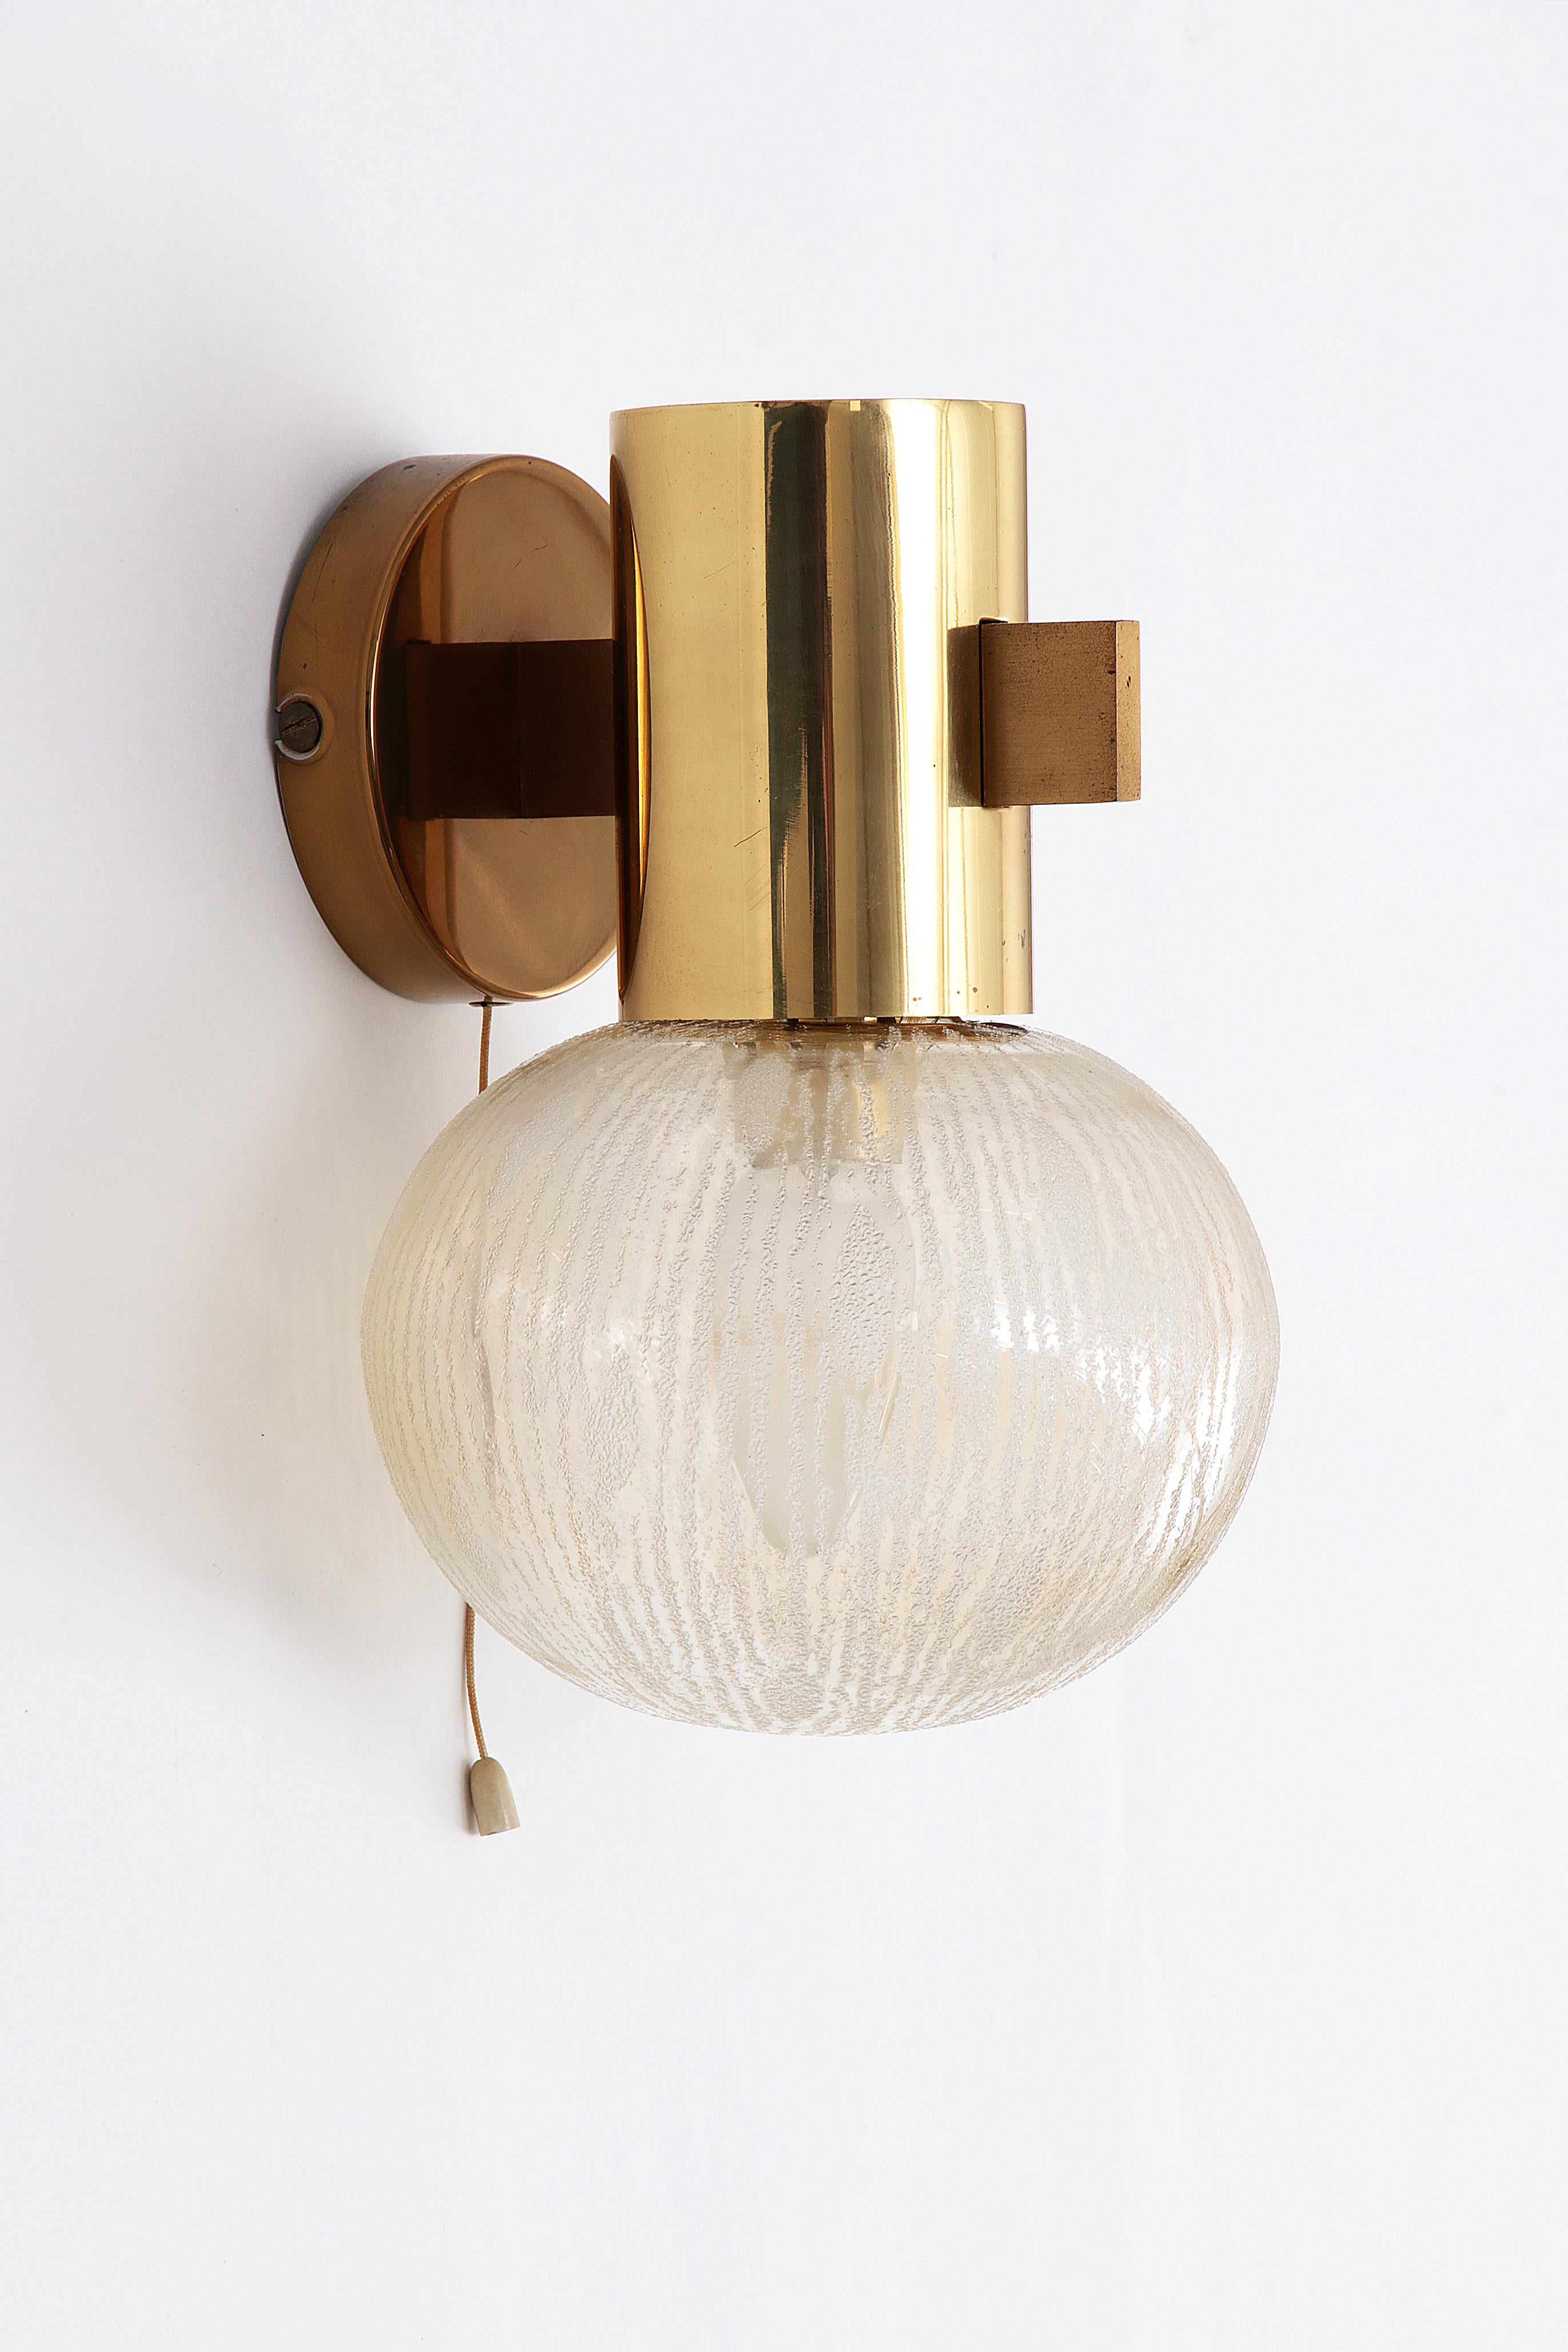 Hans-Agne Jakobsen brass wall lamp with glass Sweden 1960

Discover the timeless elegance of the Hans-Agne Jakobssen wall lamp, a masterpiece that transforms any room with its subtle shine and refined design. Manufactured at AB Markaryd in Sweden,